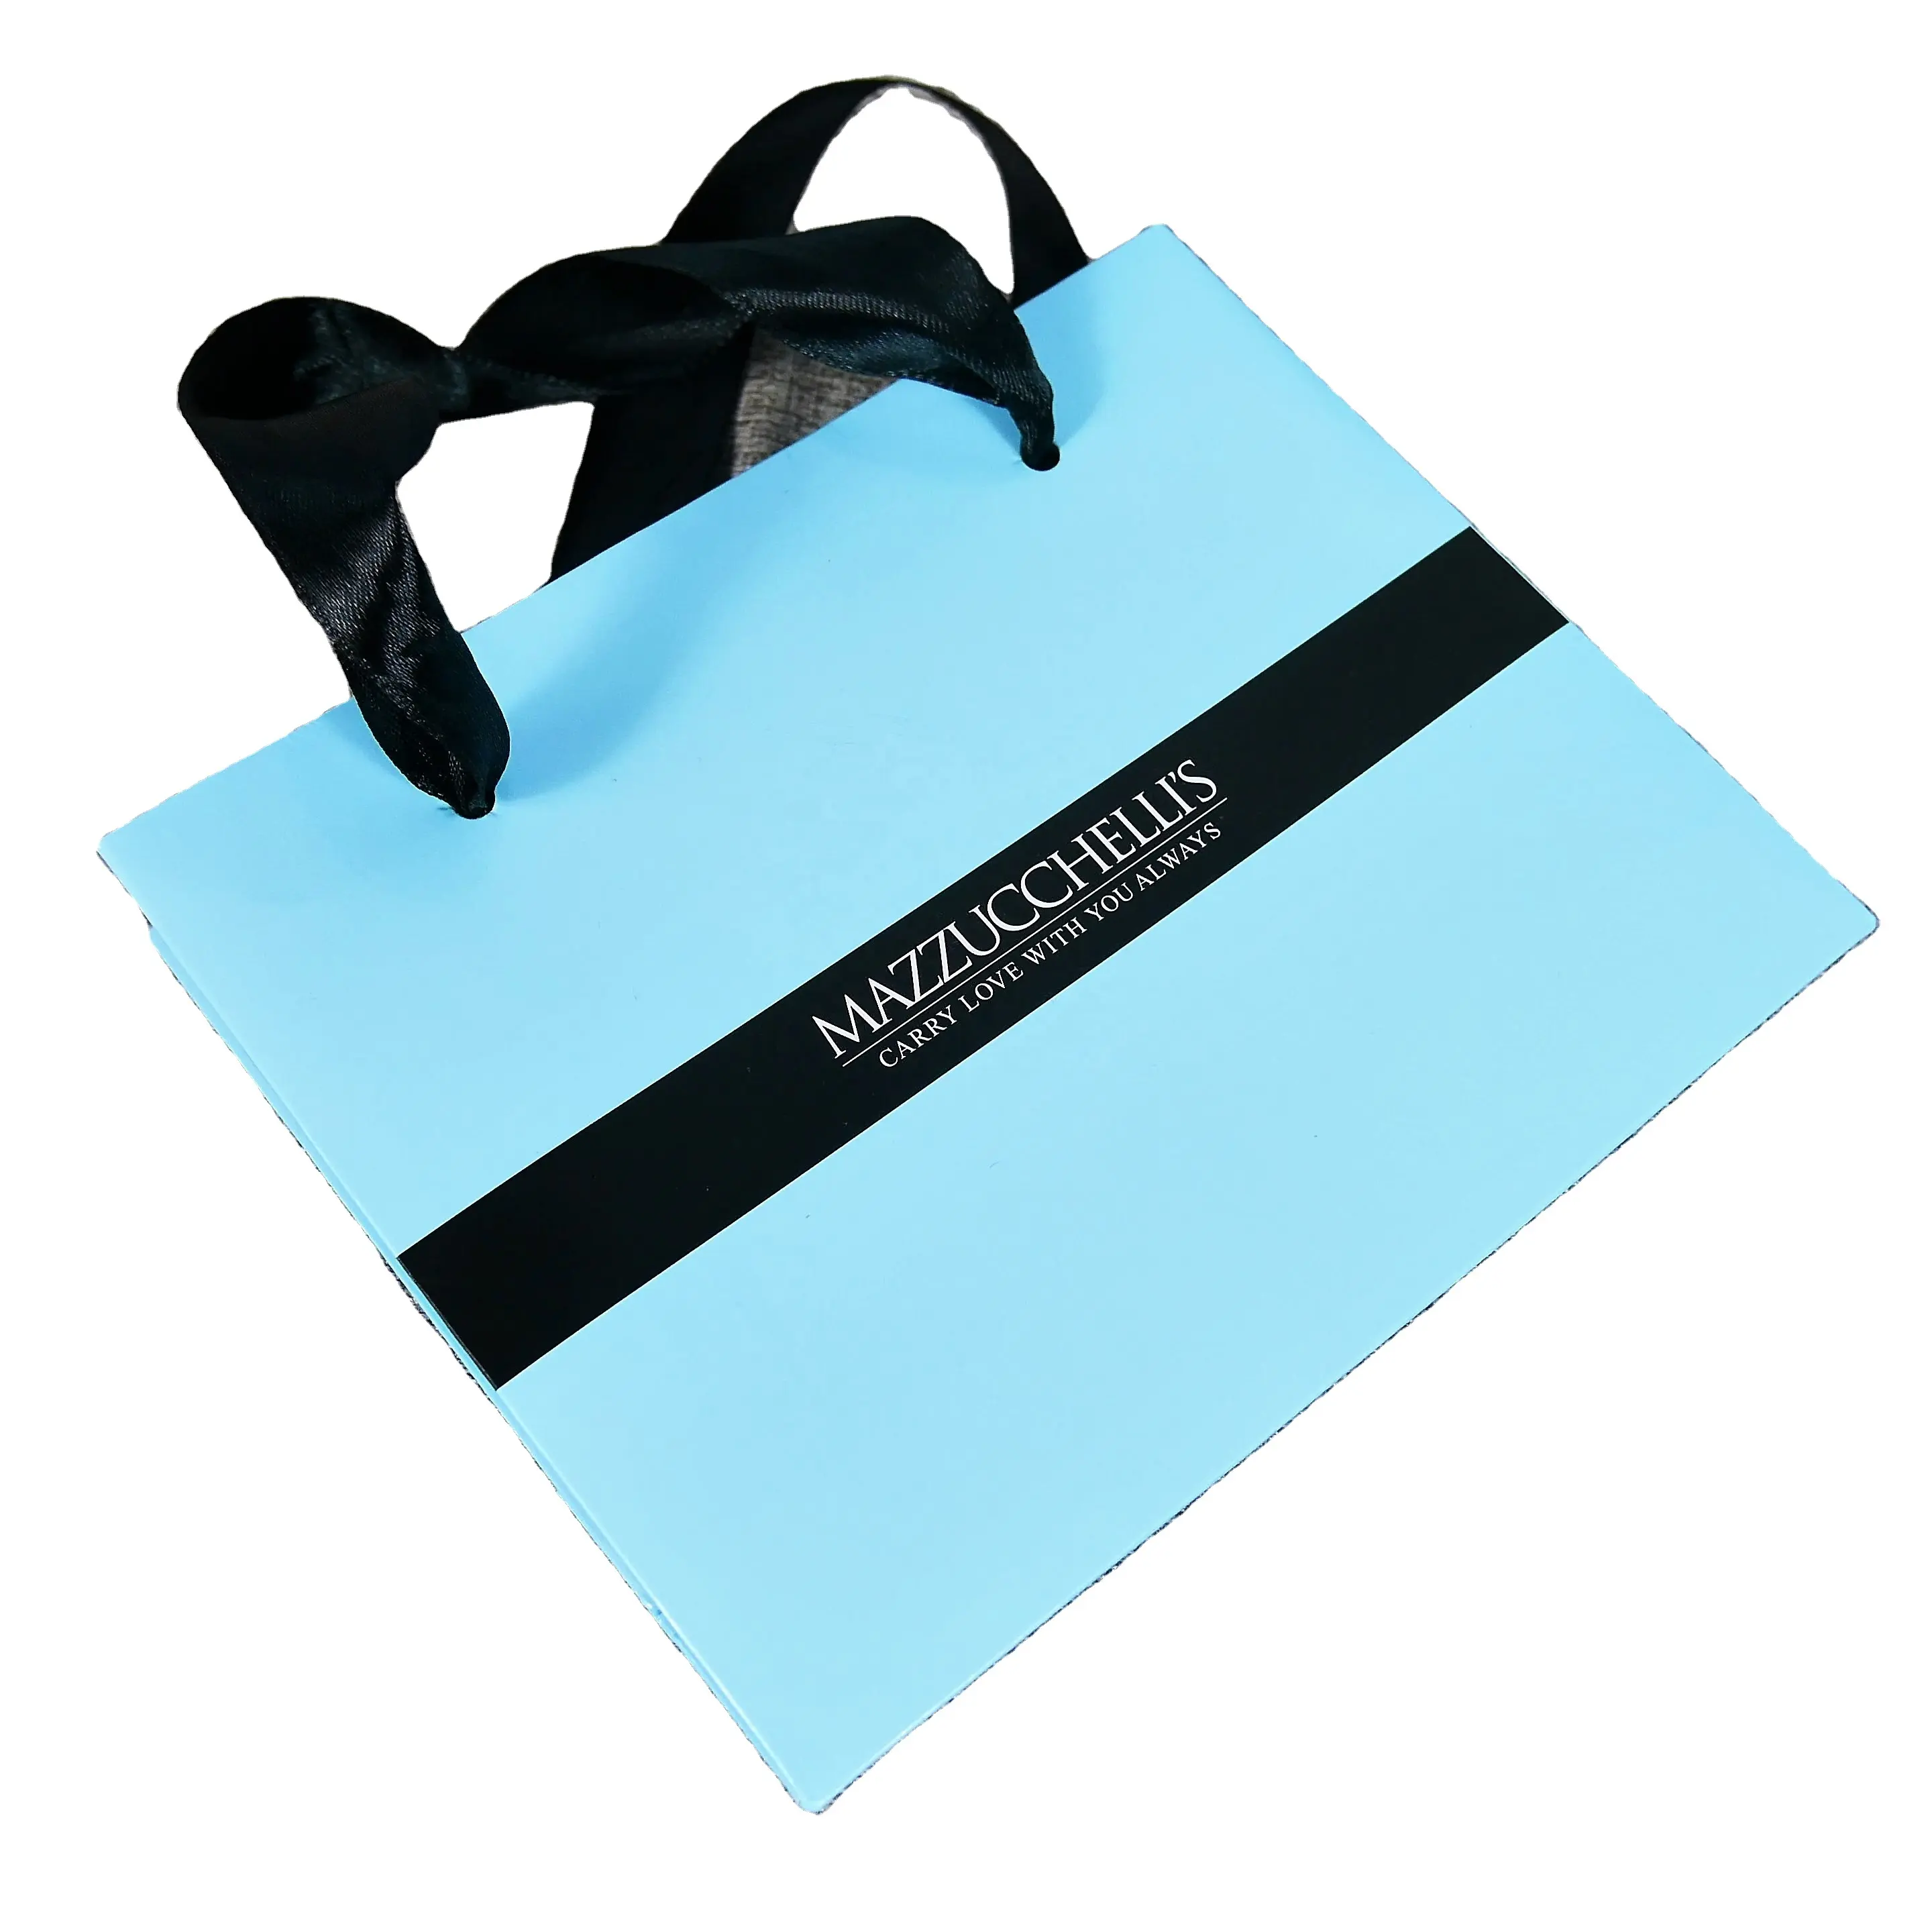 Hand Bag Cosmetic Shopping Gift Bag With Your Logo Jewelry Paper Bag with Satin Handle